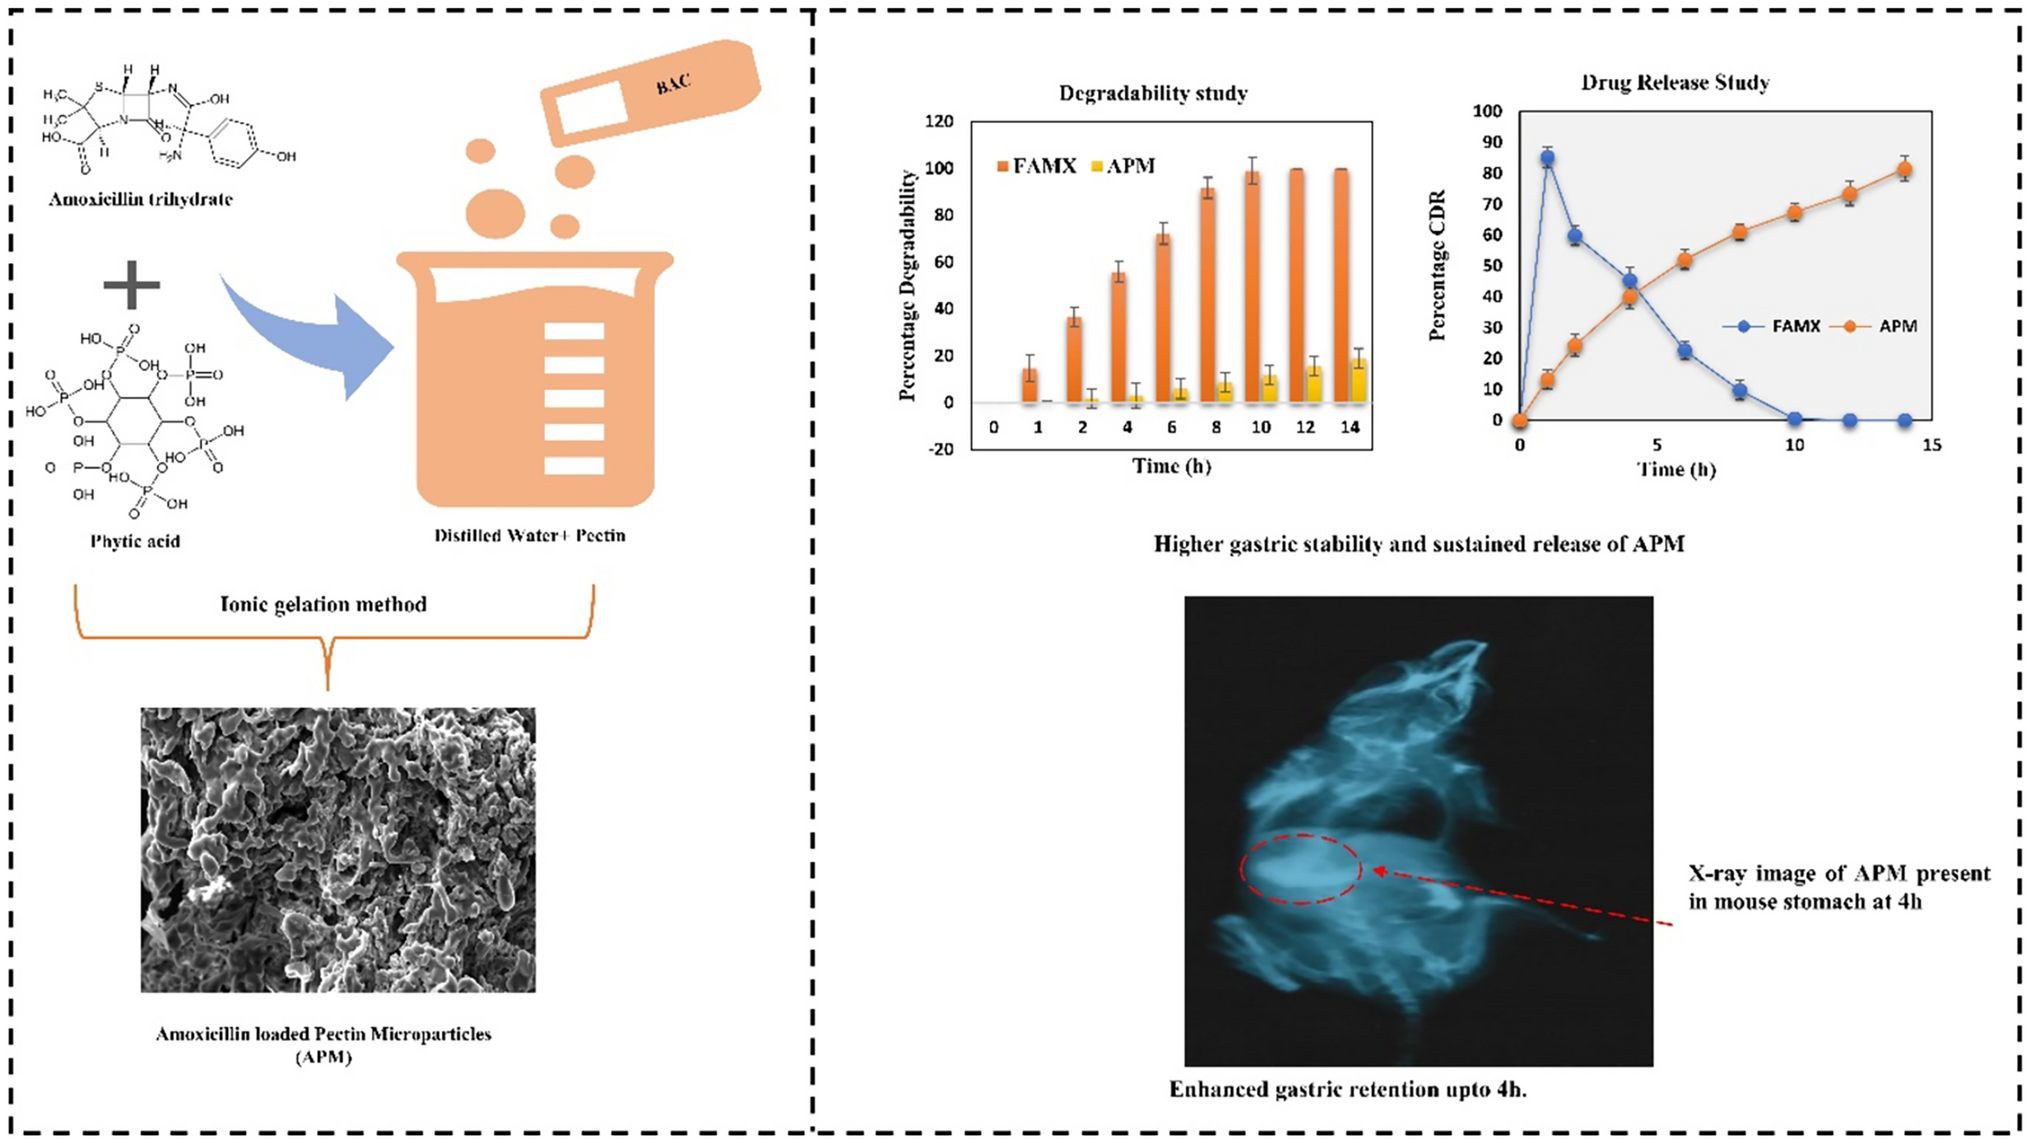 Development and Evaluation of Novel Amoxicillin and Phytic Acid-Loaded Gastro-Retentive Mucoadhesive Pectin Microparticles for the Management of Helicobacter pylori Infections